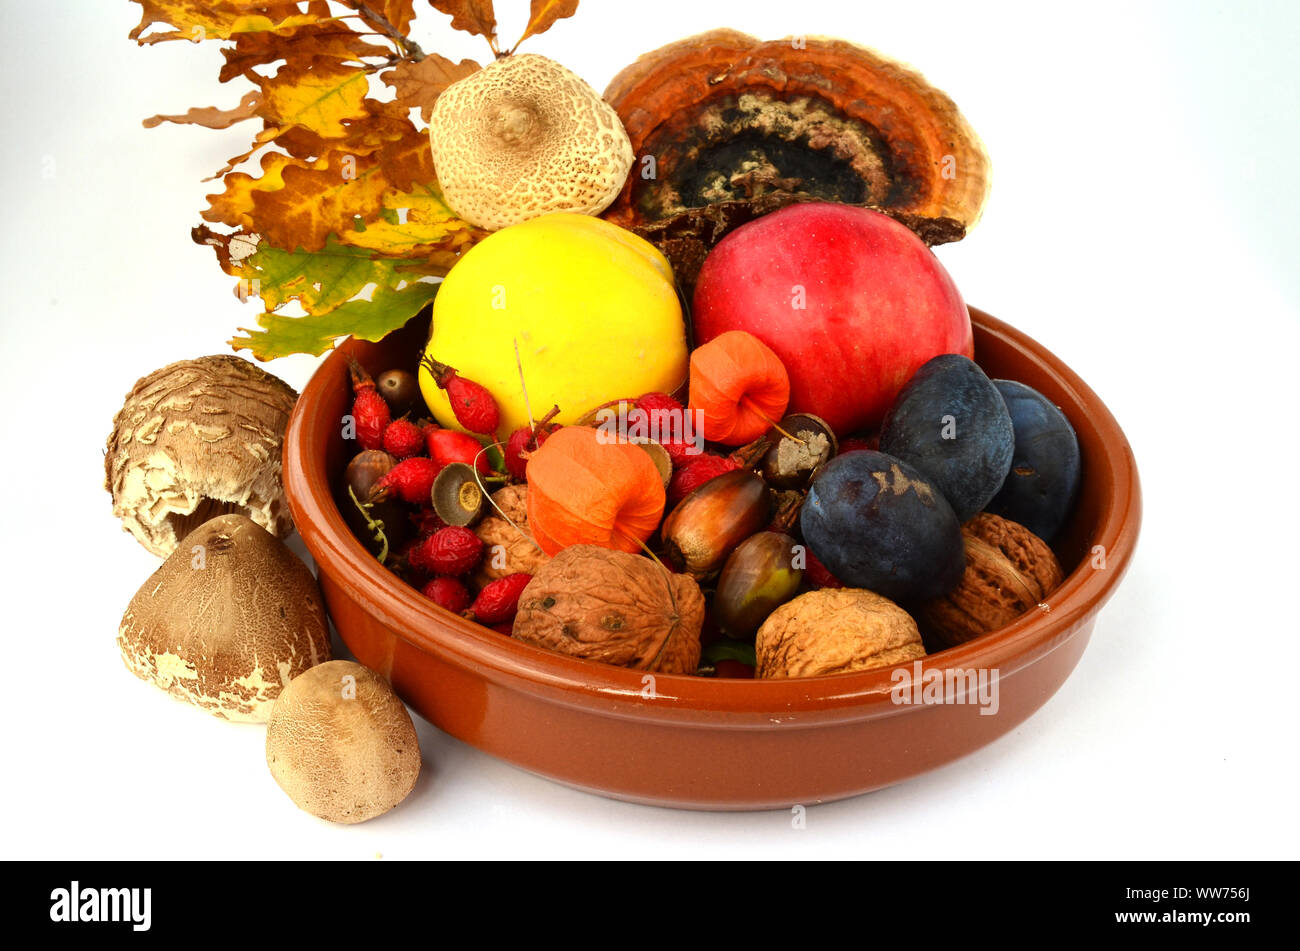 Autumn decoration - fall in a ceramic bowl - - fruit, fall leaves, acorns, nuts and mushrooms Stock Photo